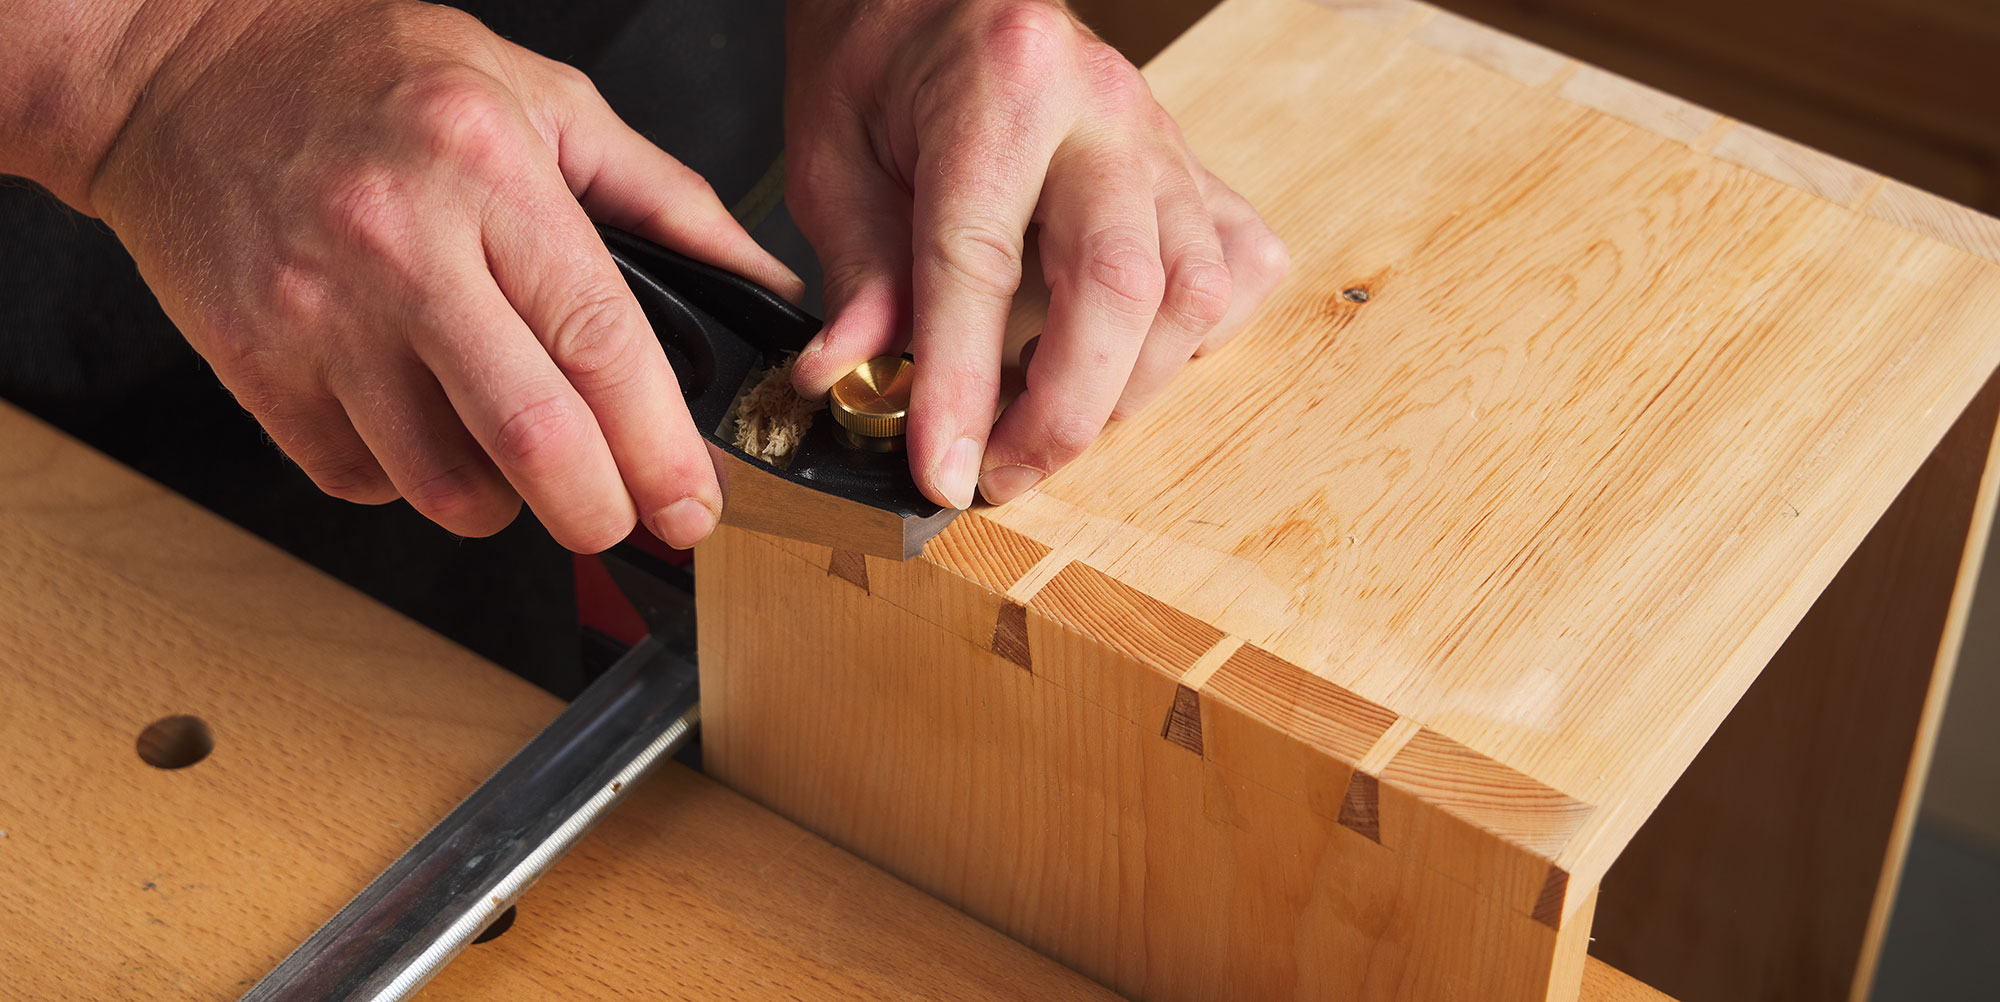 Planing a dovetail joint by skewing the blade and dampening the end grain.